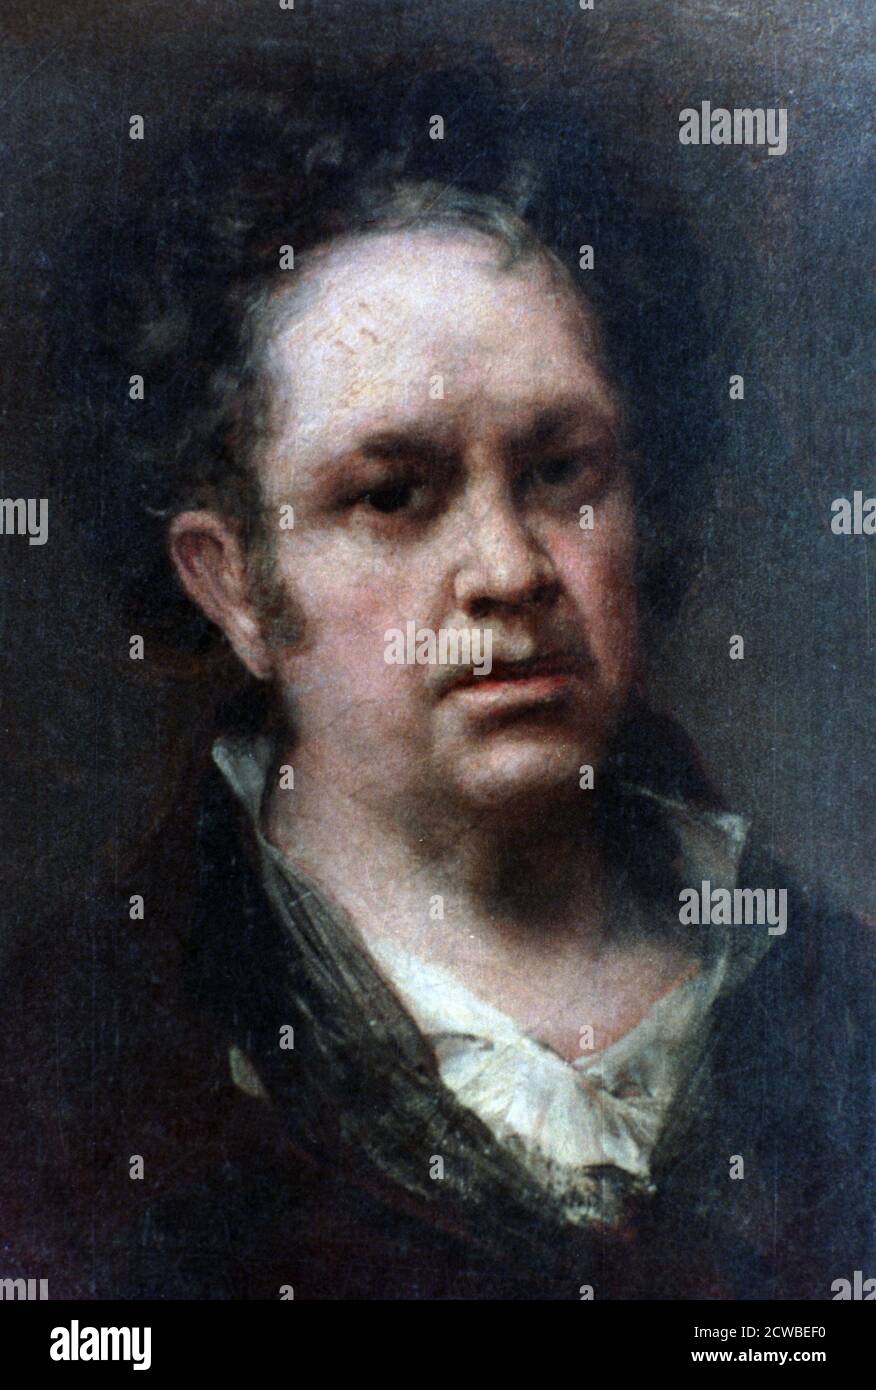 Self Portrait', 1815. Artist: Francisco Goya. Francisco Goya (1746-1828) was a Spanish artist whose paintings, drawings, and engravings reflected contemporary historical upheavals and influenced important 19th and 20th century painters. Stock Photo